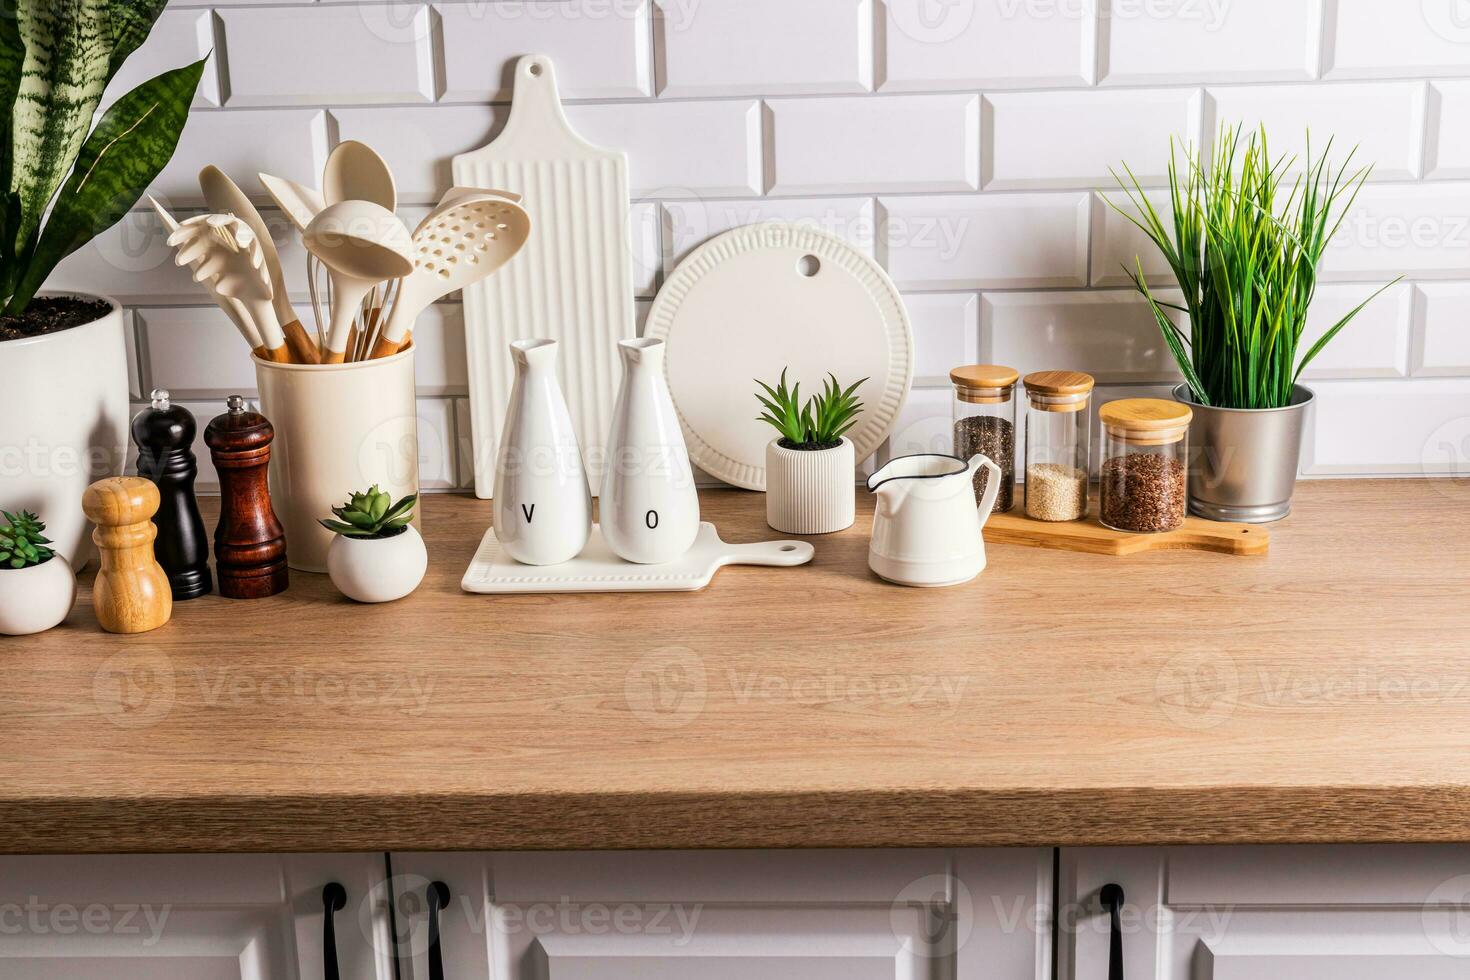 White ceramic utensils and kitchen utensils on a wooden countertop in an eco-friendly kitchen with green indoor plants. Cozy house photo